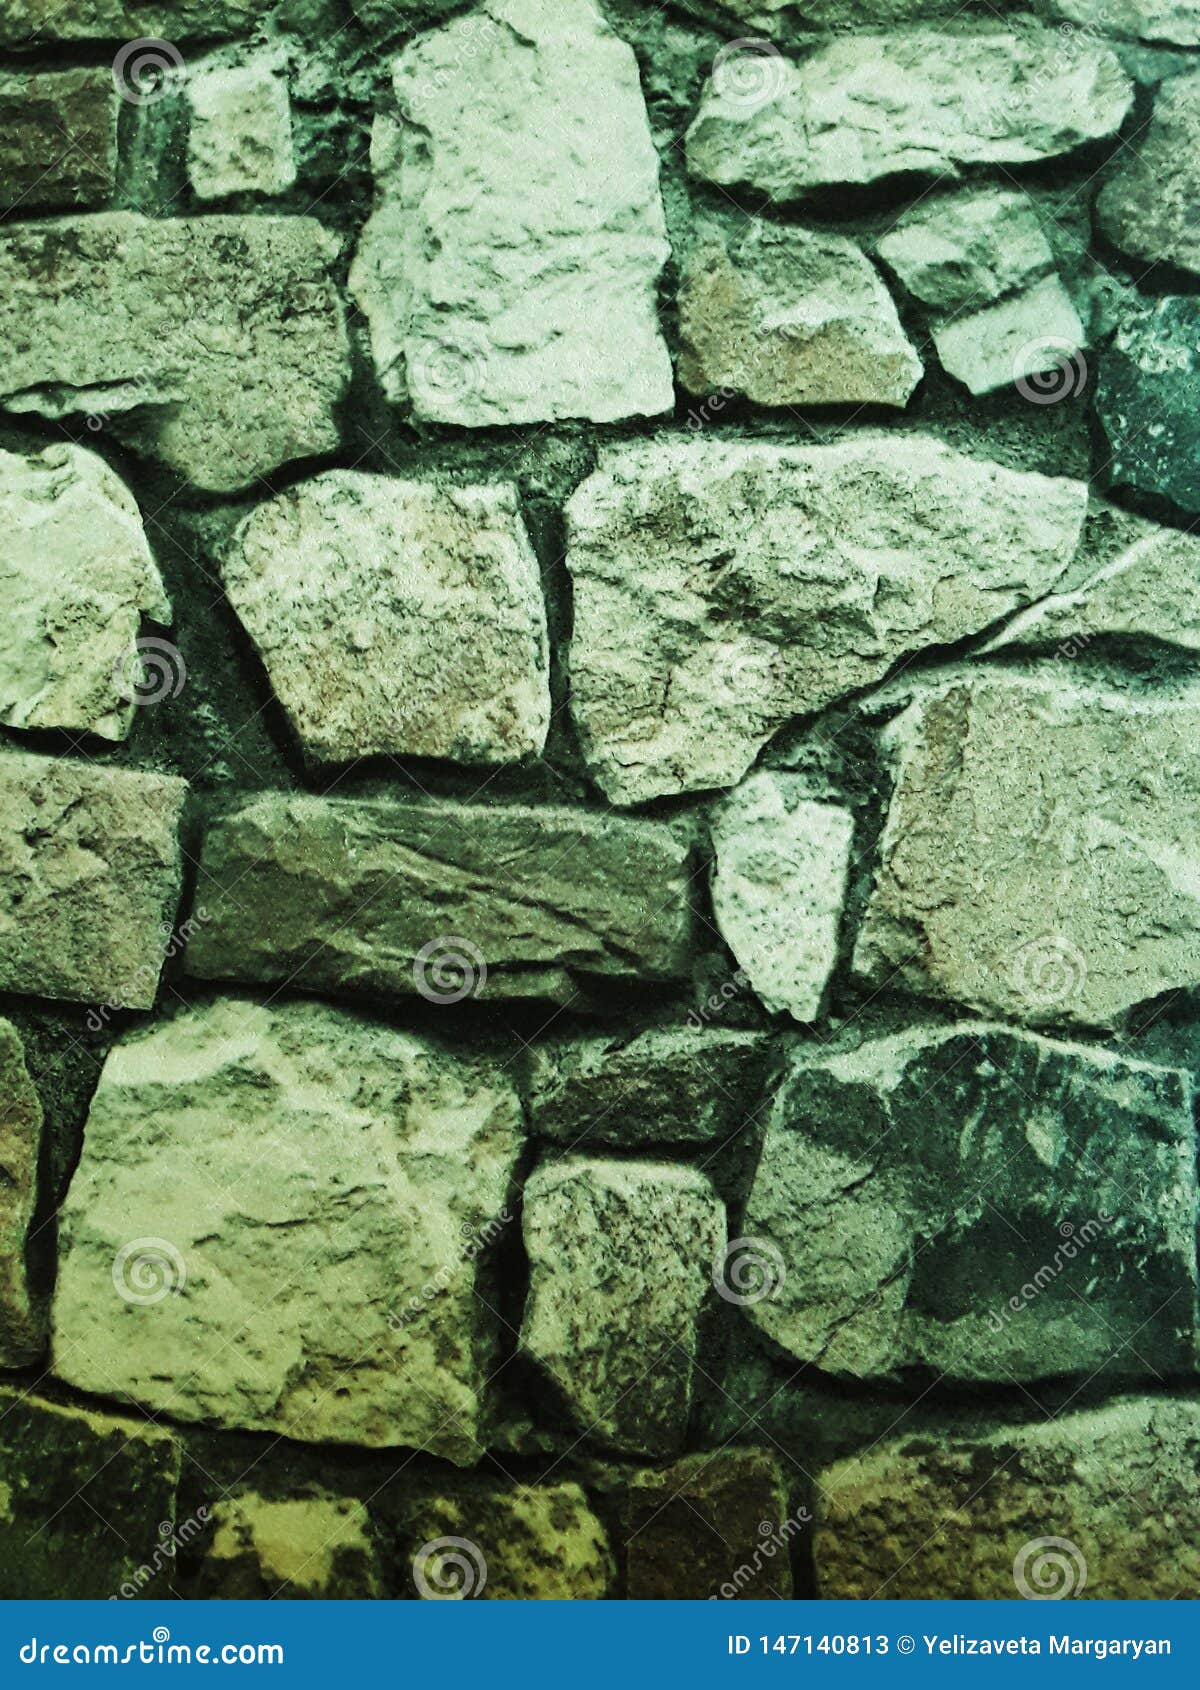 Stone Wall Texture Stone Style Wallpaper Exterior Design Image Stock Image Image Of Dirty Block